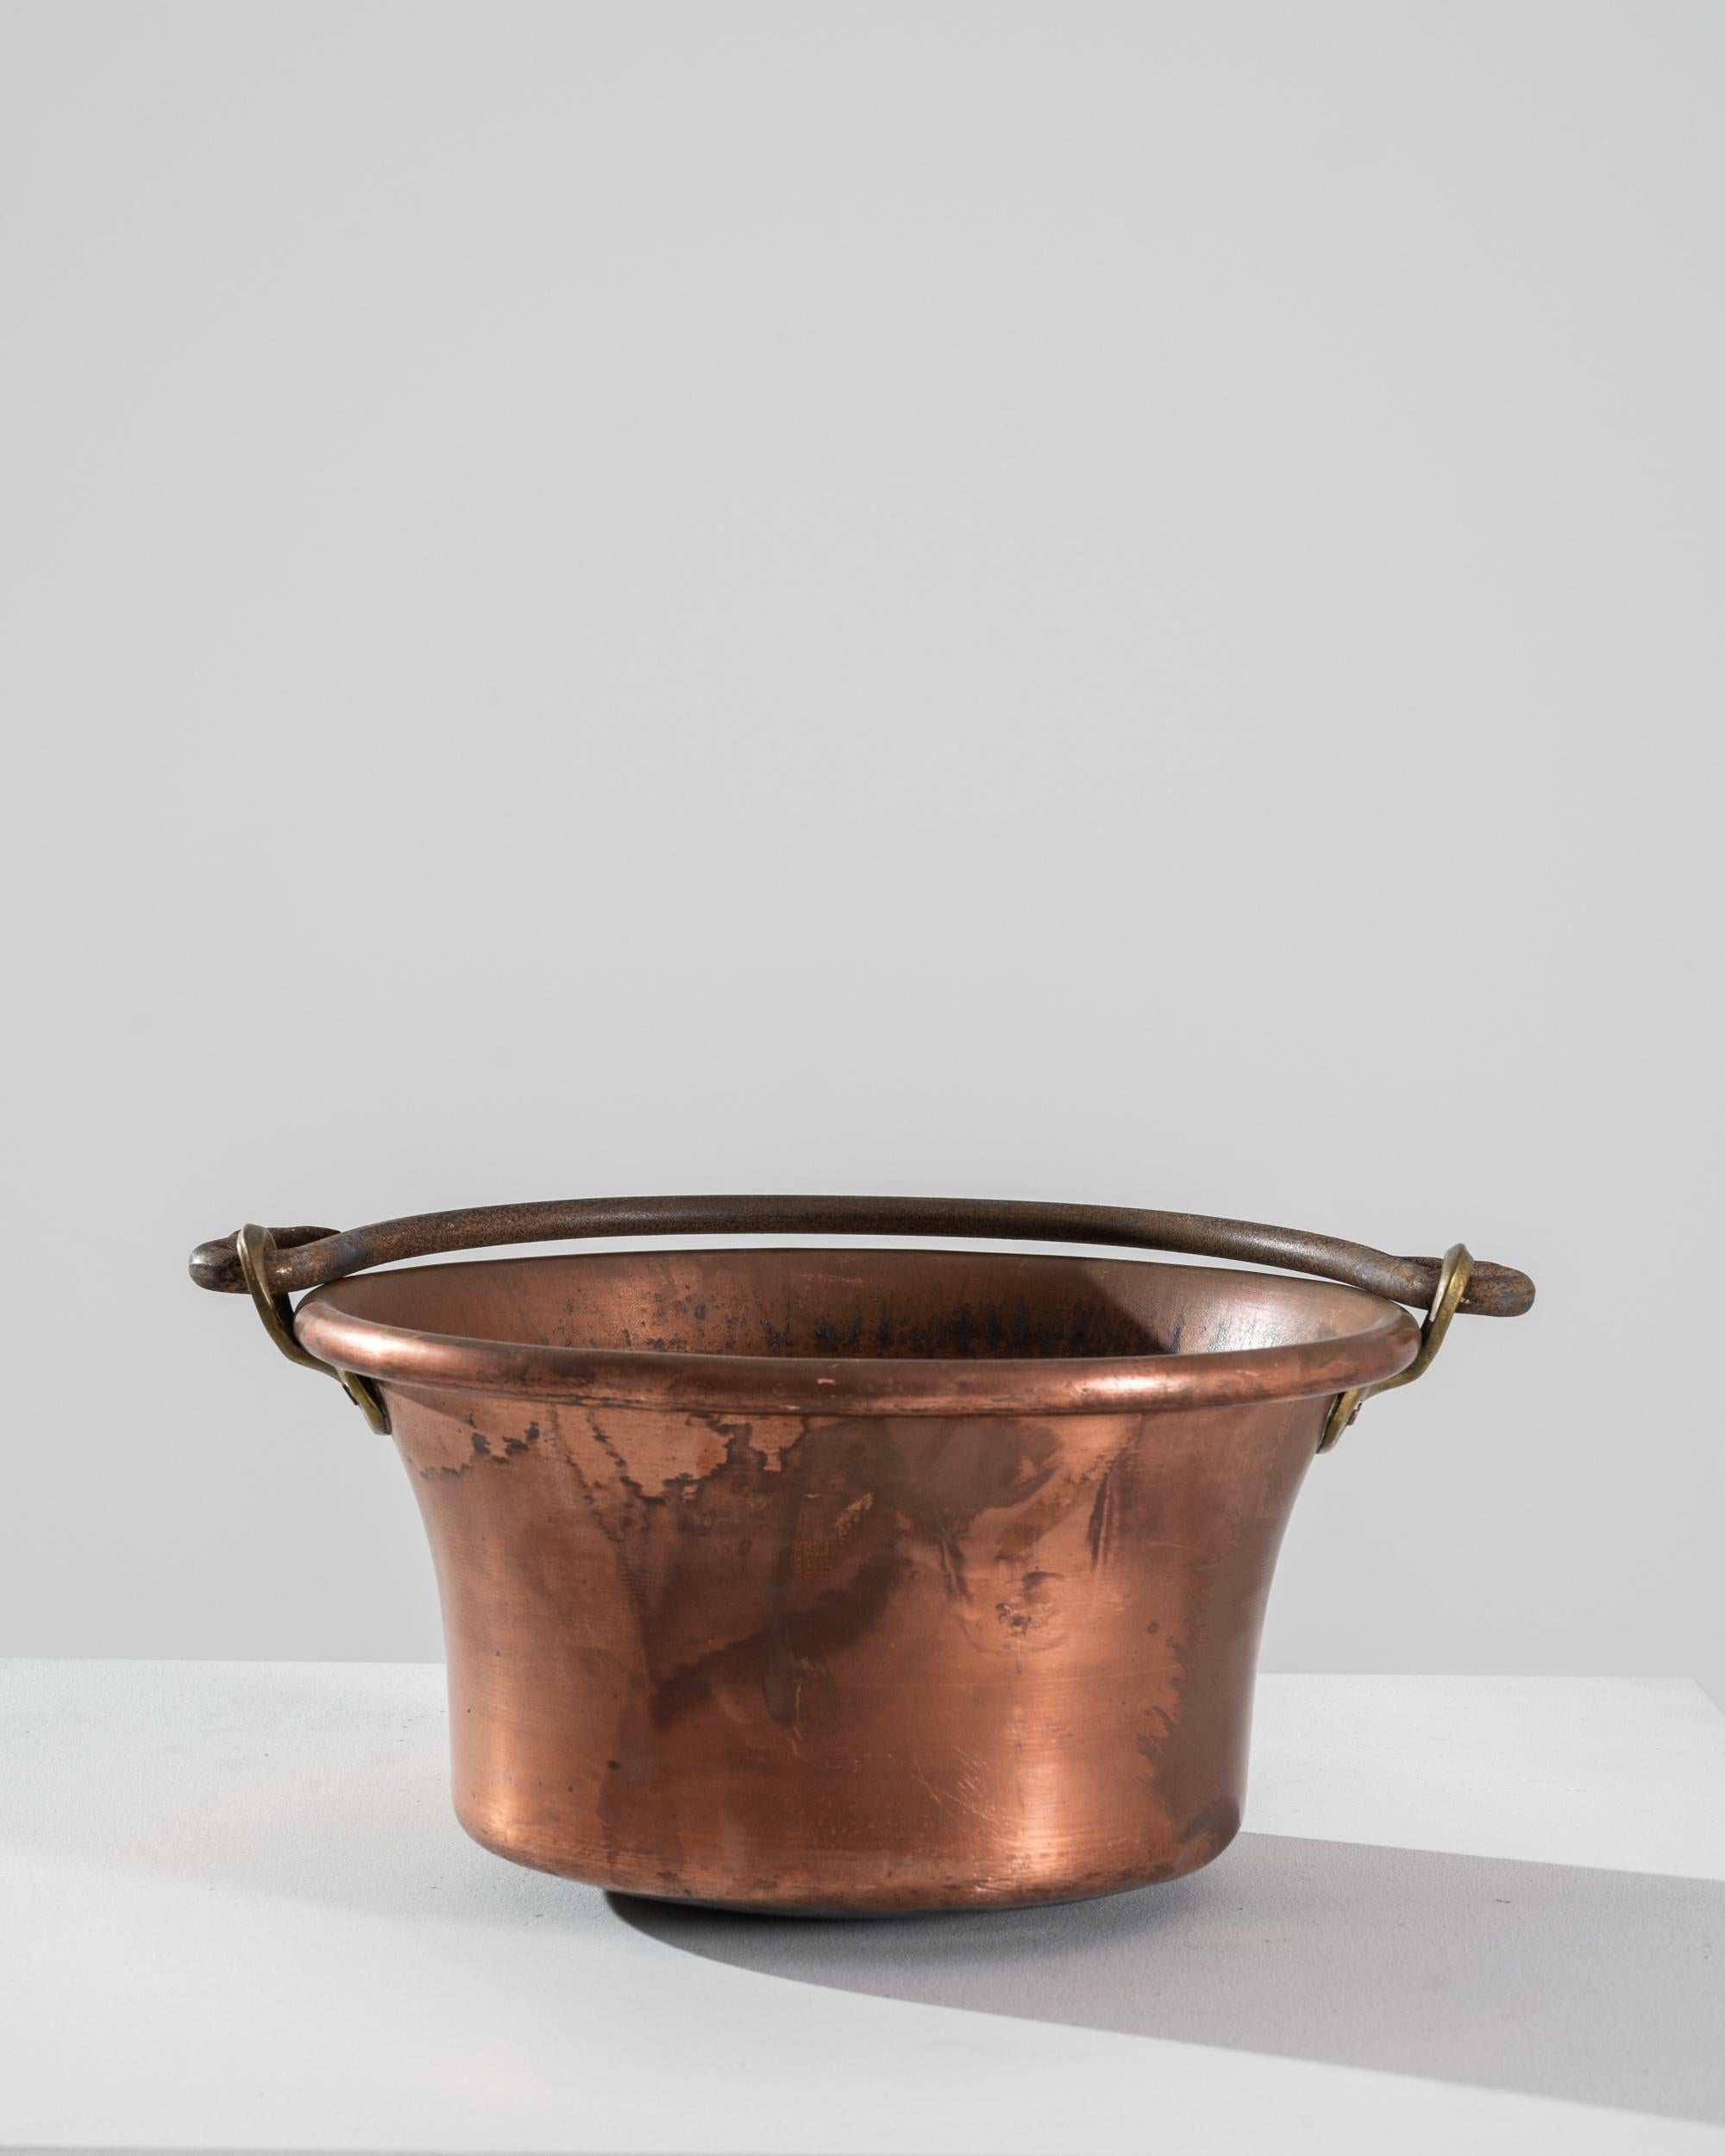 A copper pot from Belgium, circa 1900. Totally handmade, this pot features a beautiful oxidized patina layering the original polished finish. These artisanally crafted pots were made with care and detail, along with high quality materials produced